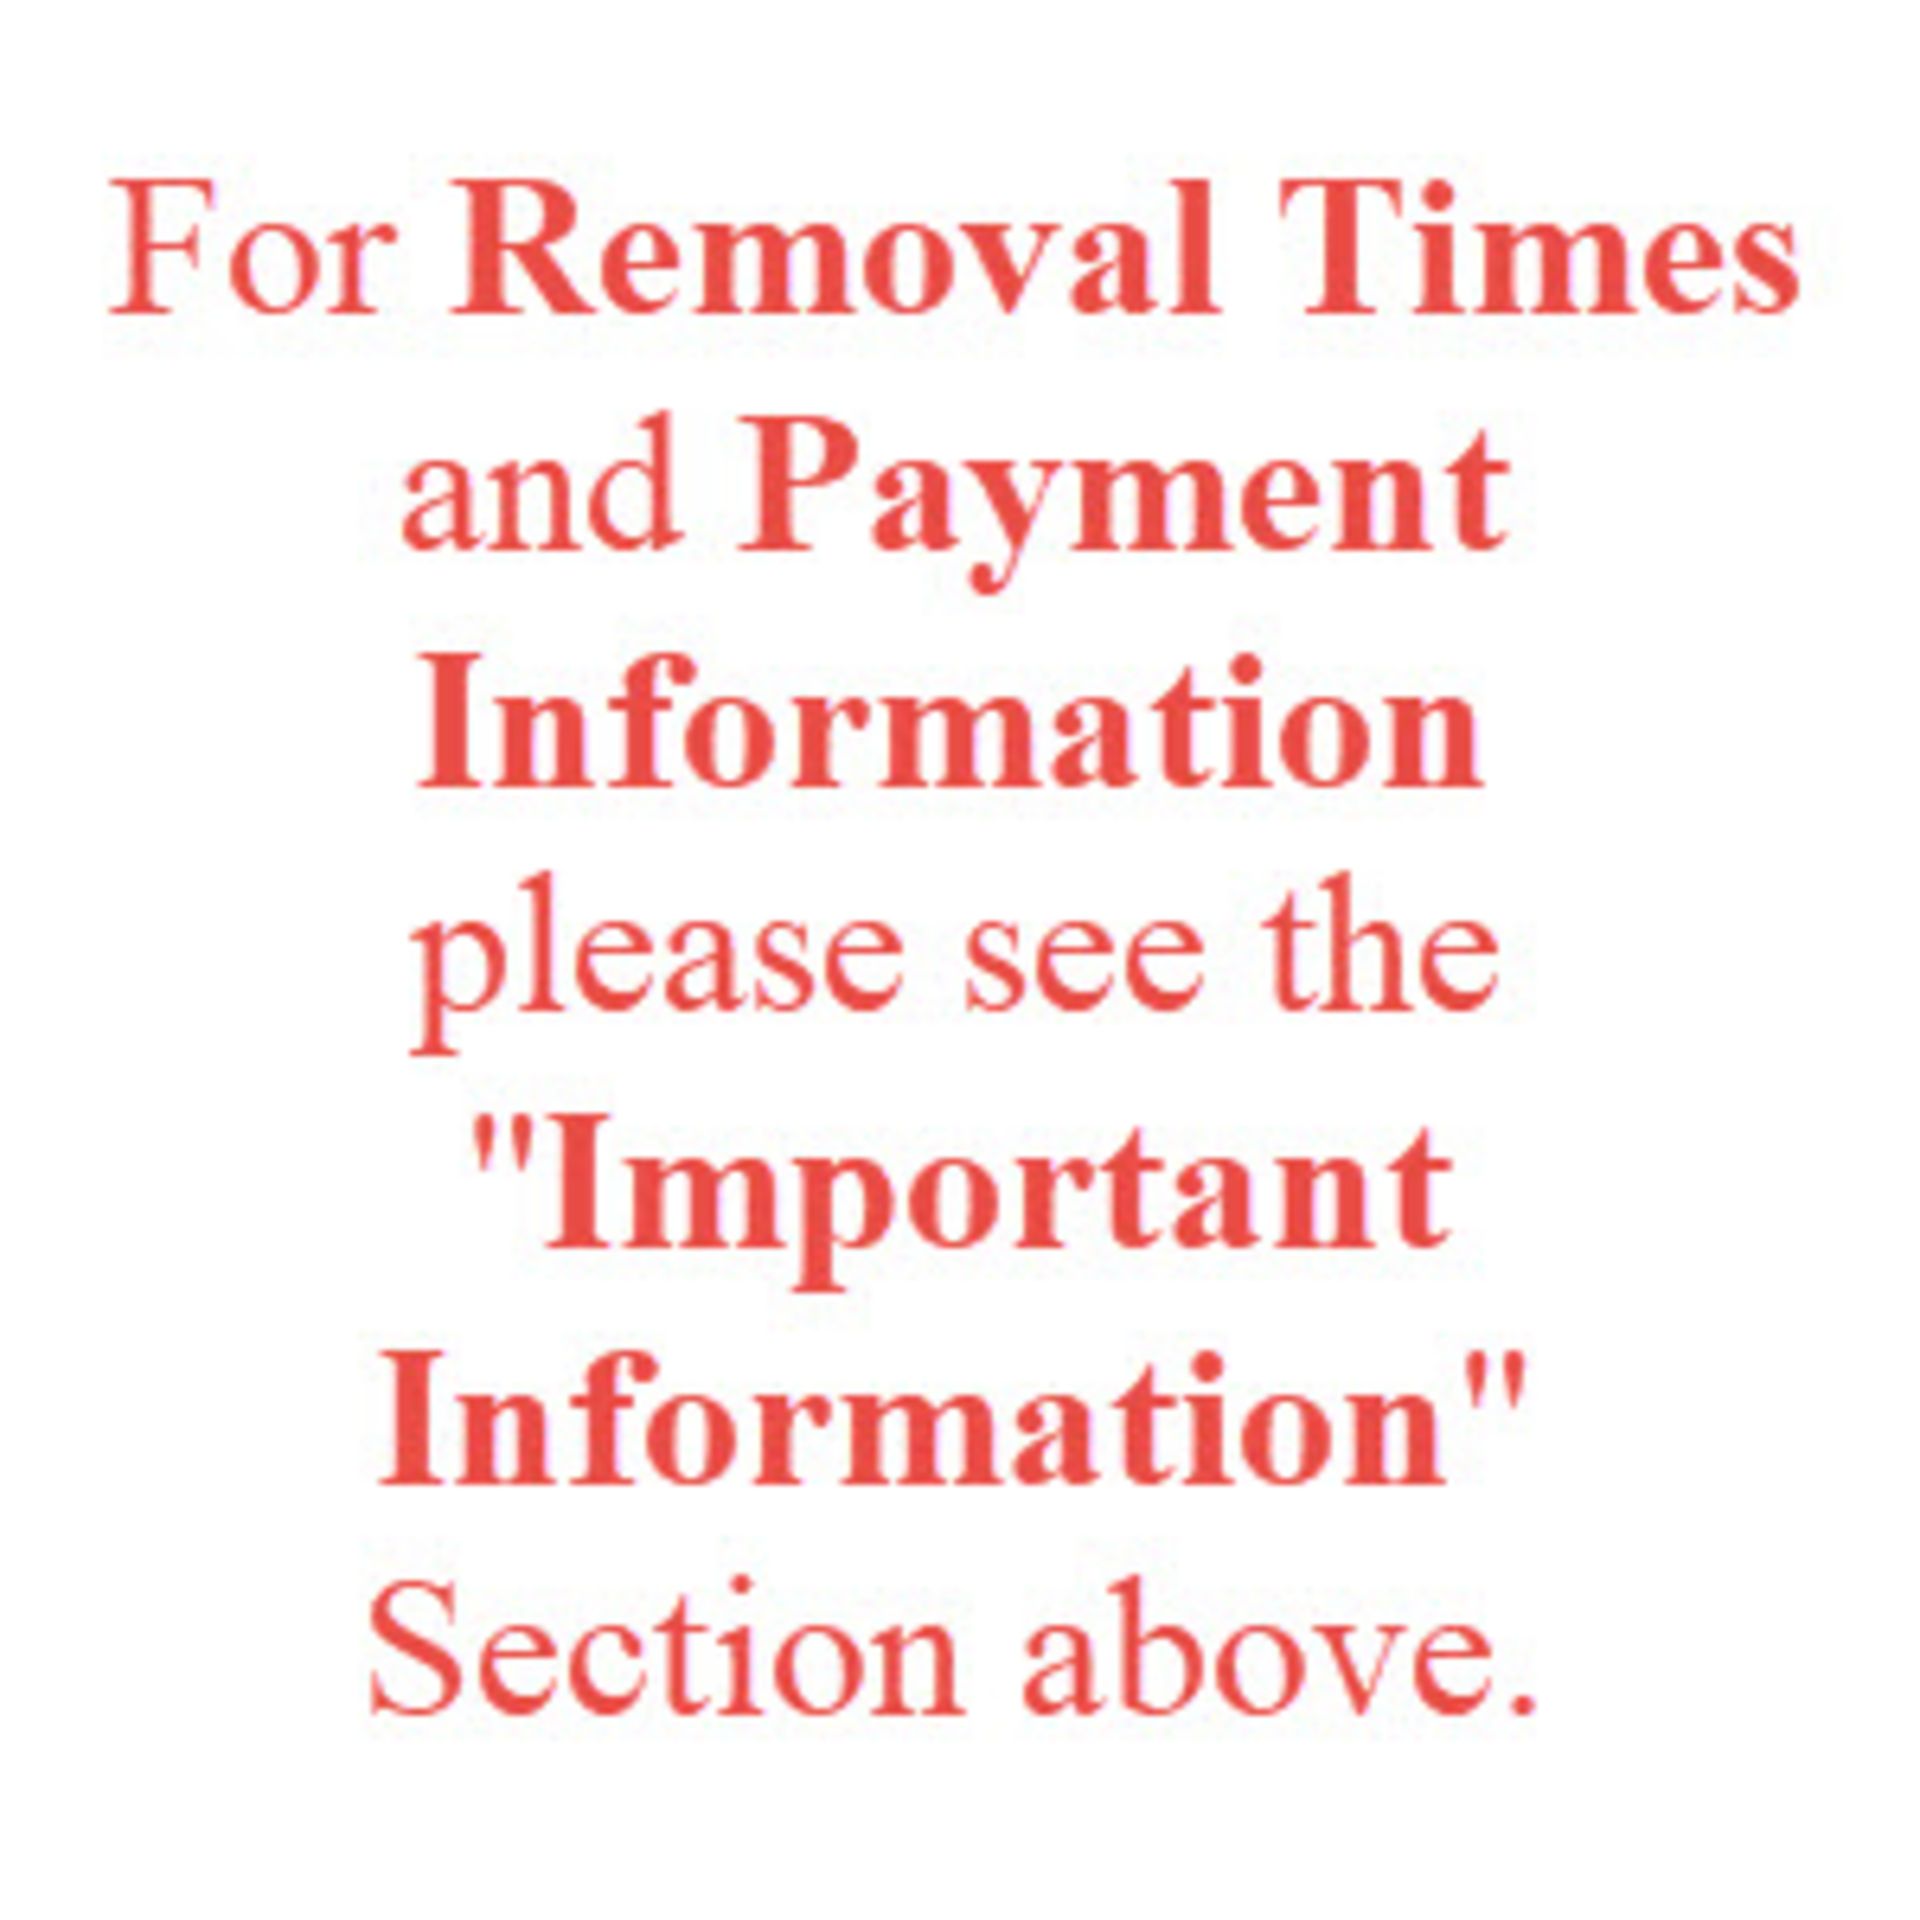 For Removal Times and Payment Information, please see "Important Information" section above.